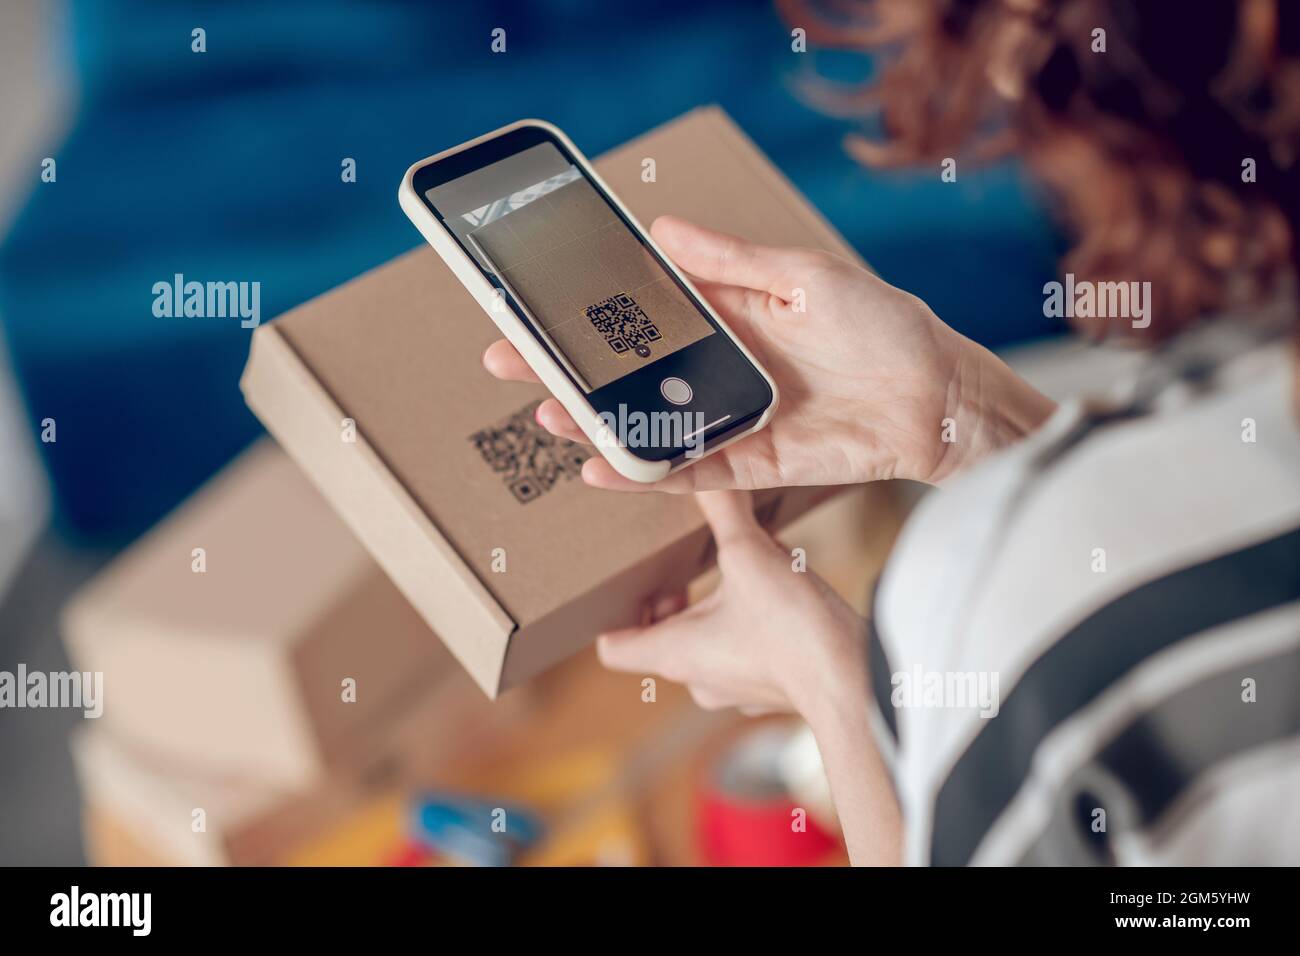 Online shop worker scanning information on the product package Stock Photo